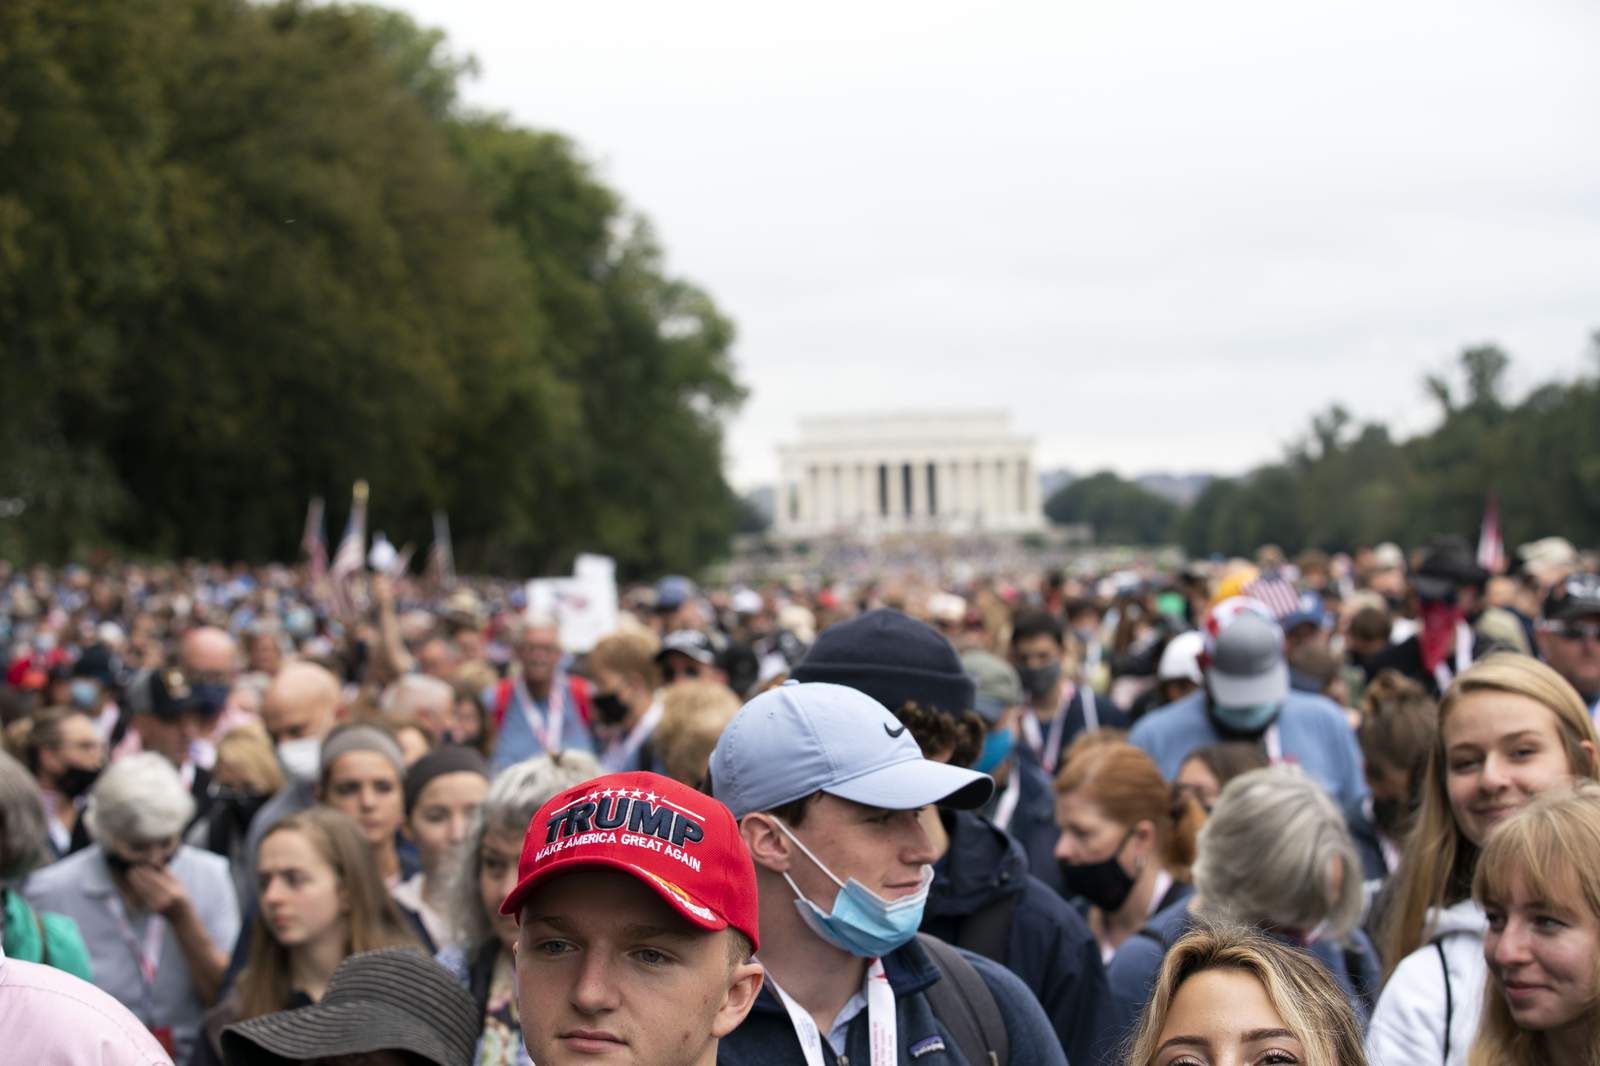 Thousands march in Washington to pray and show Trump support